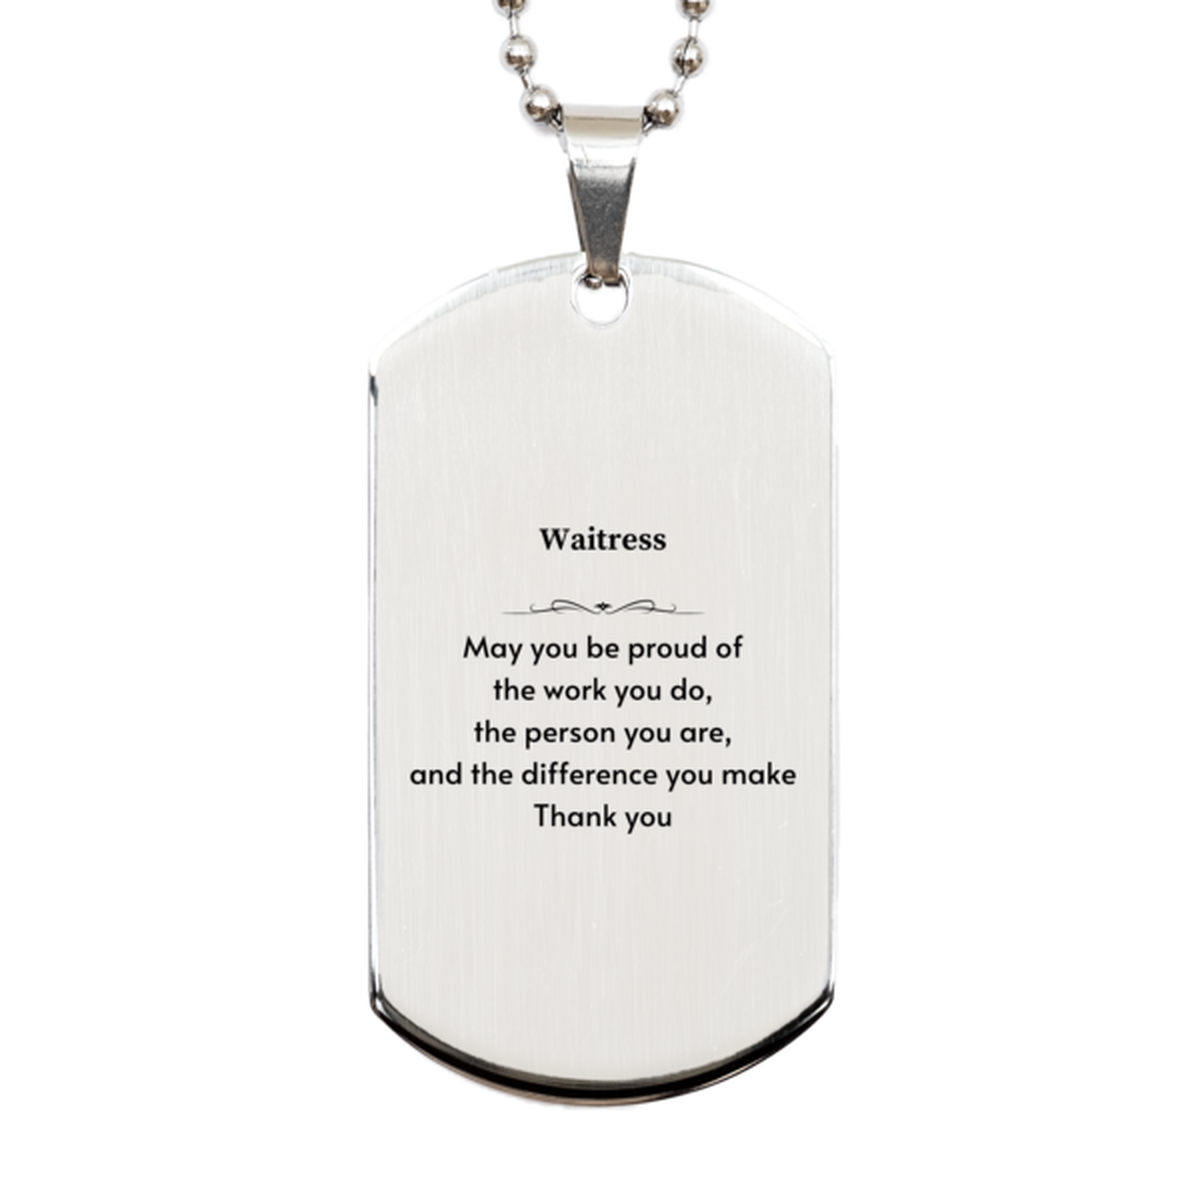 Heartwarming Silver Dog Tag Retirement Coworkers Gifts for Waitress, Waitress May You be proud of the work you do, the person you are Gifts for Boss Men Women Friends